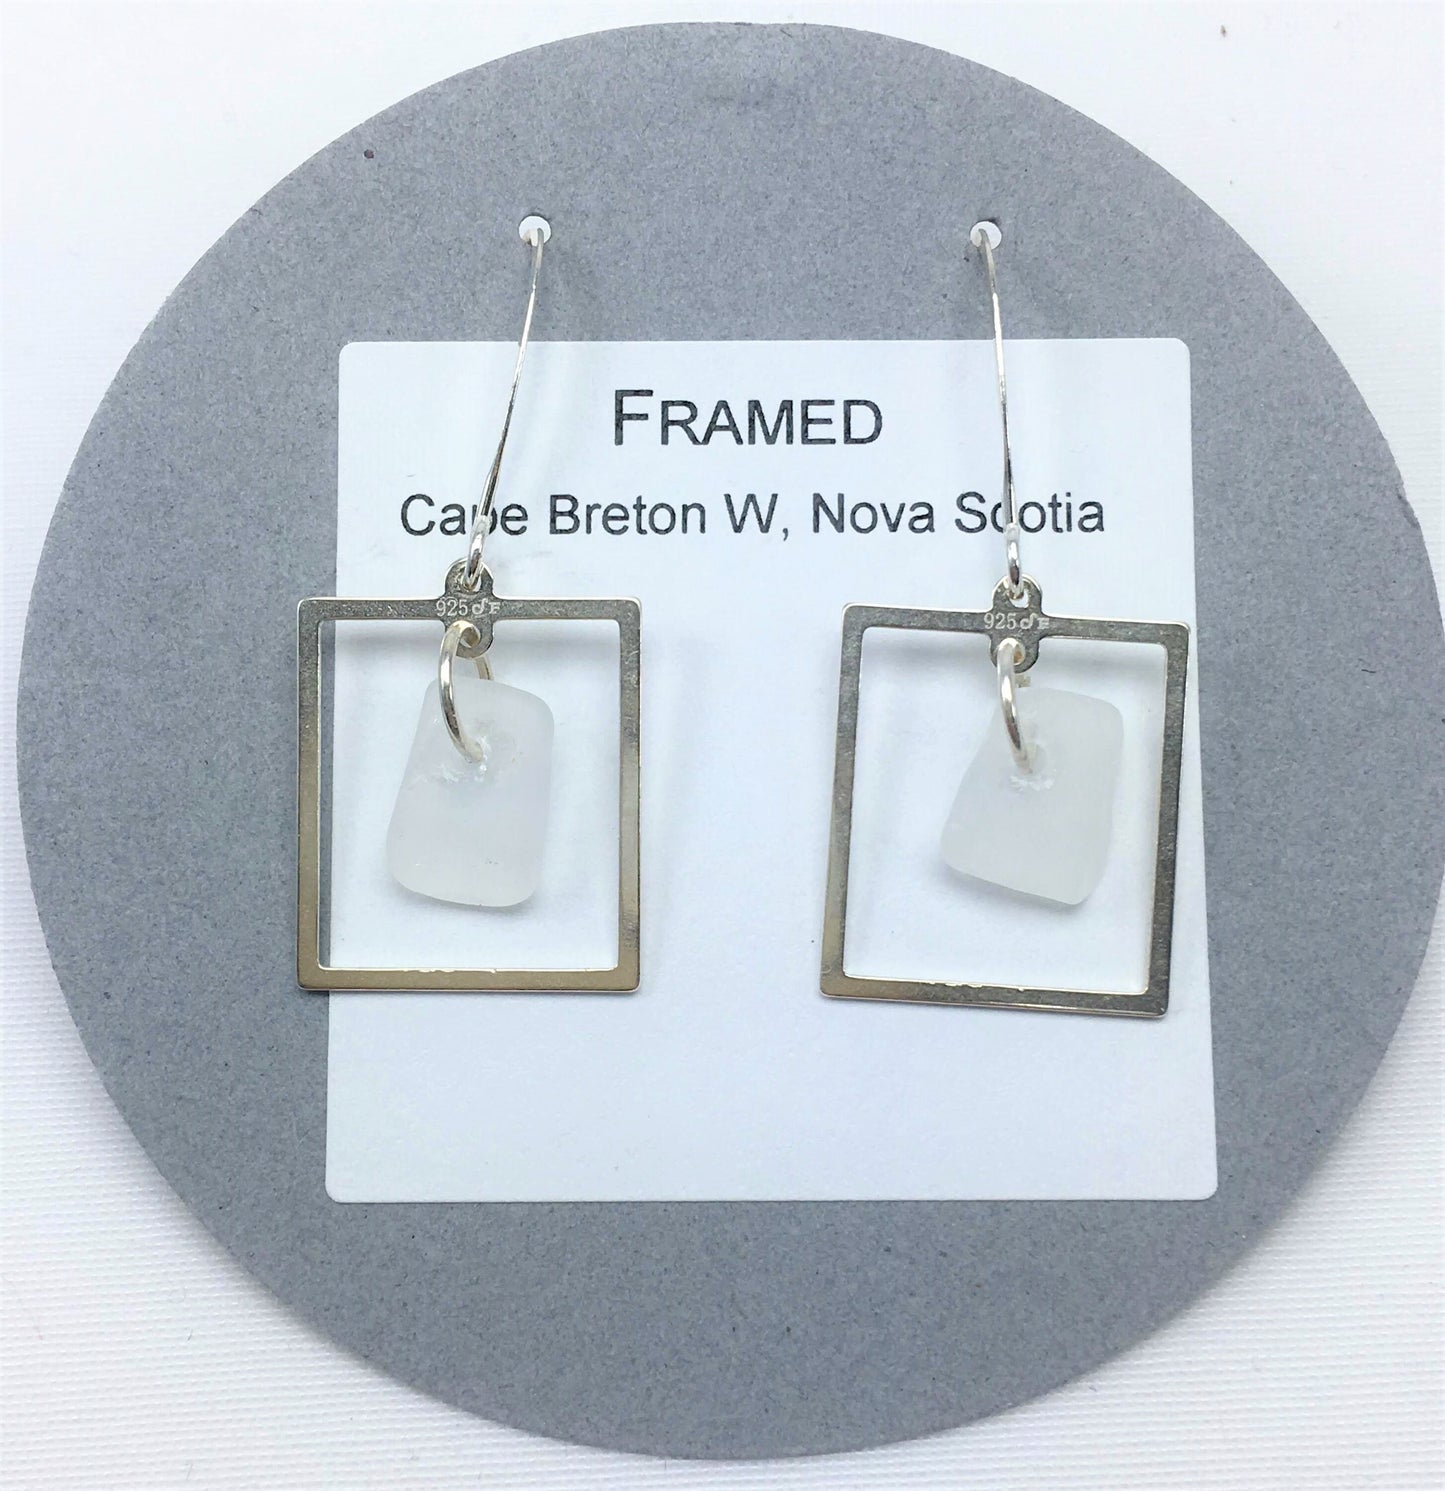 Framed! Earrings with white sea glass from Cape Breton, Nova Scotia, Canada framed in sterling silver on a nickle-free hook